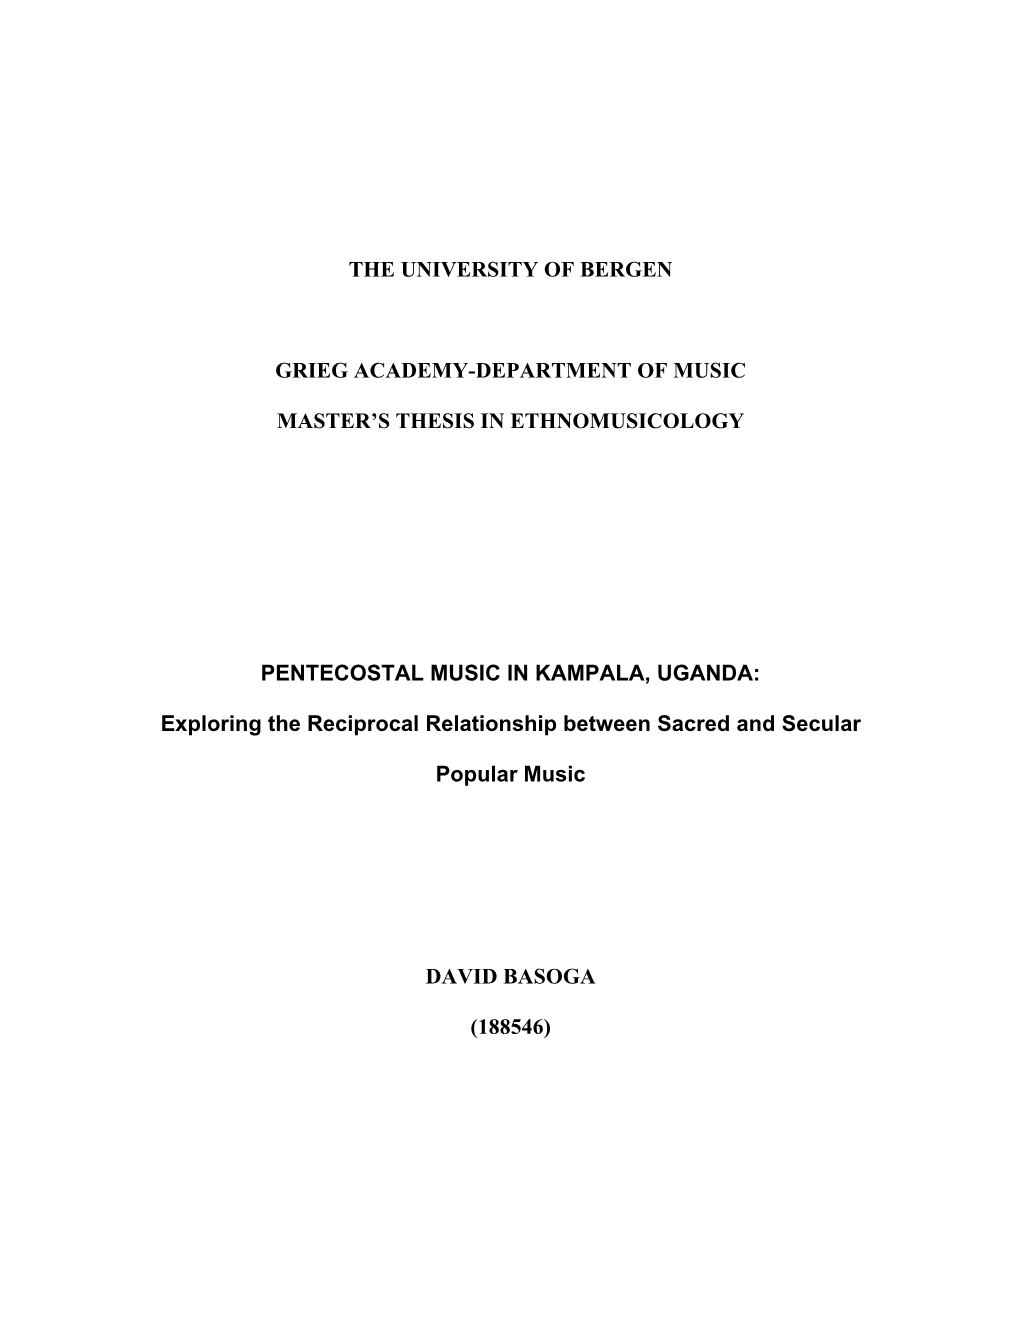 The University of Bergen Grieg Academy-Department of Music Master's Thesis in Ethnomusicology Pentecostal Music in Kampala, U